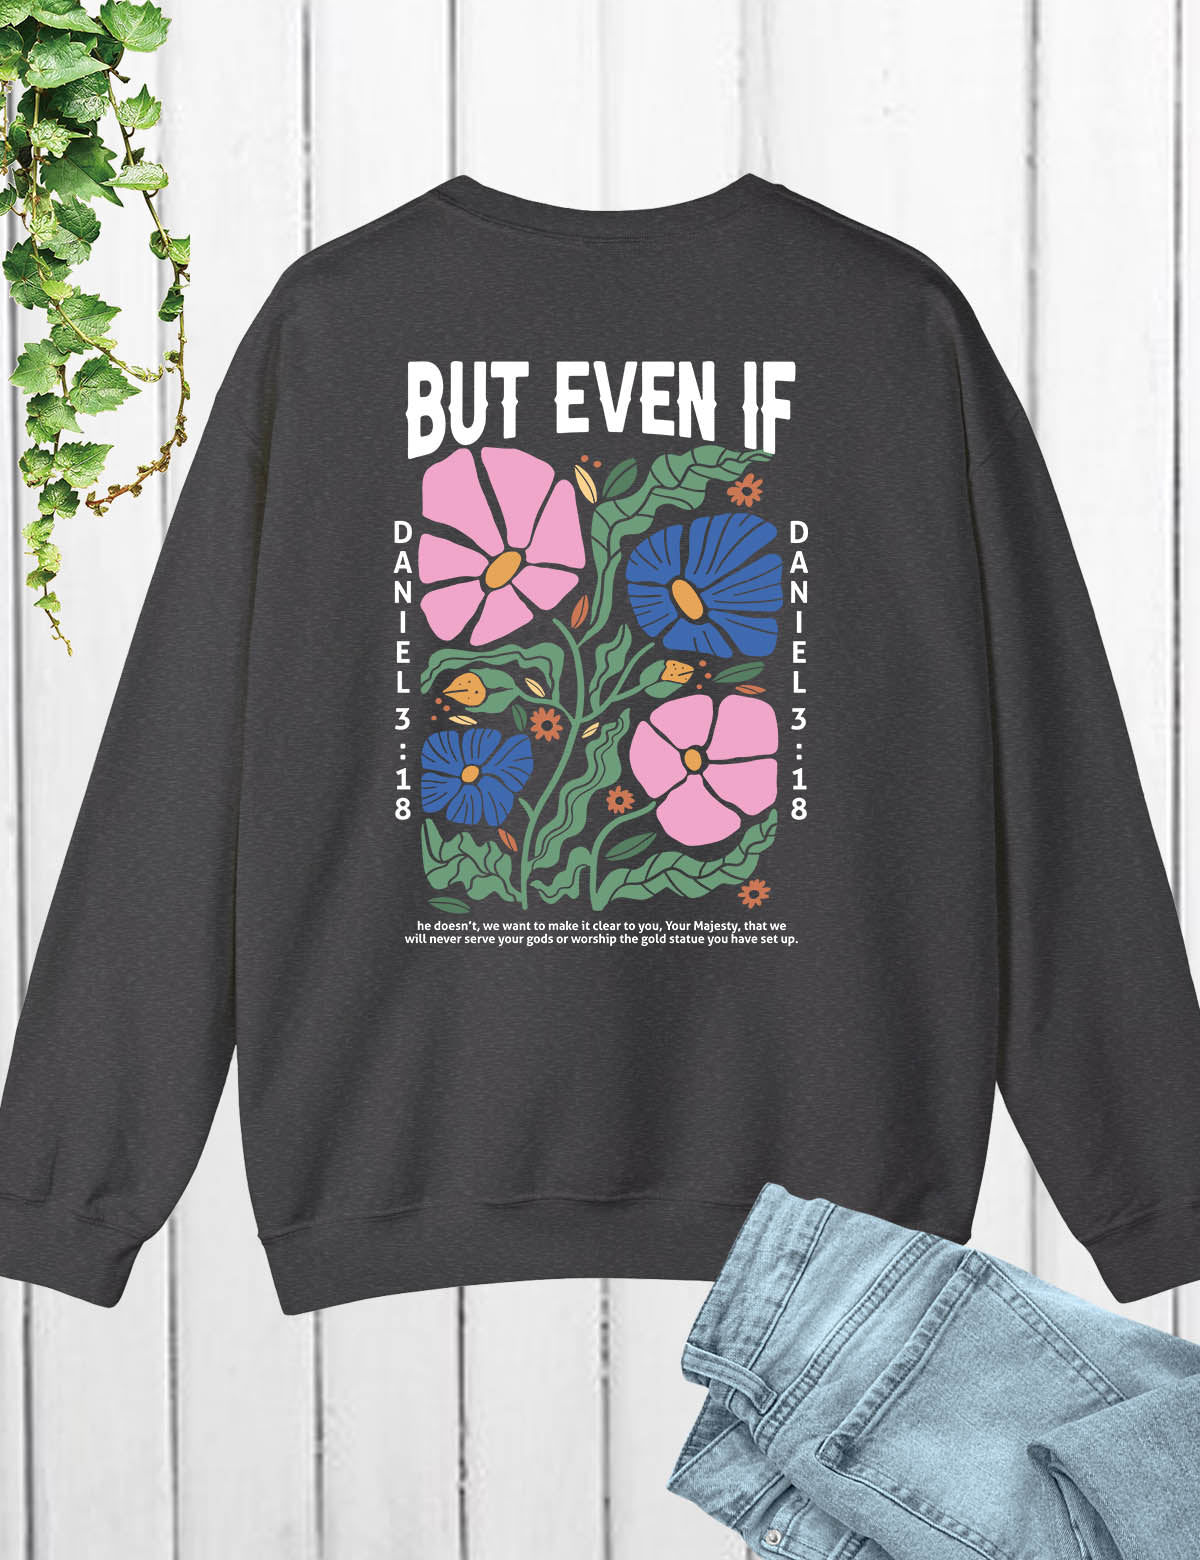 But Even If he Doesn't, We Want To Clear You Worship Boho Sweatshirt back print